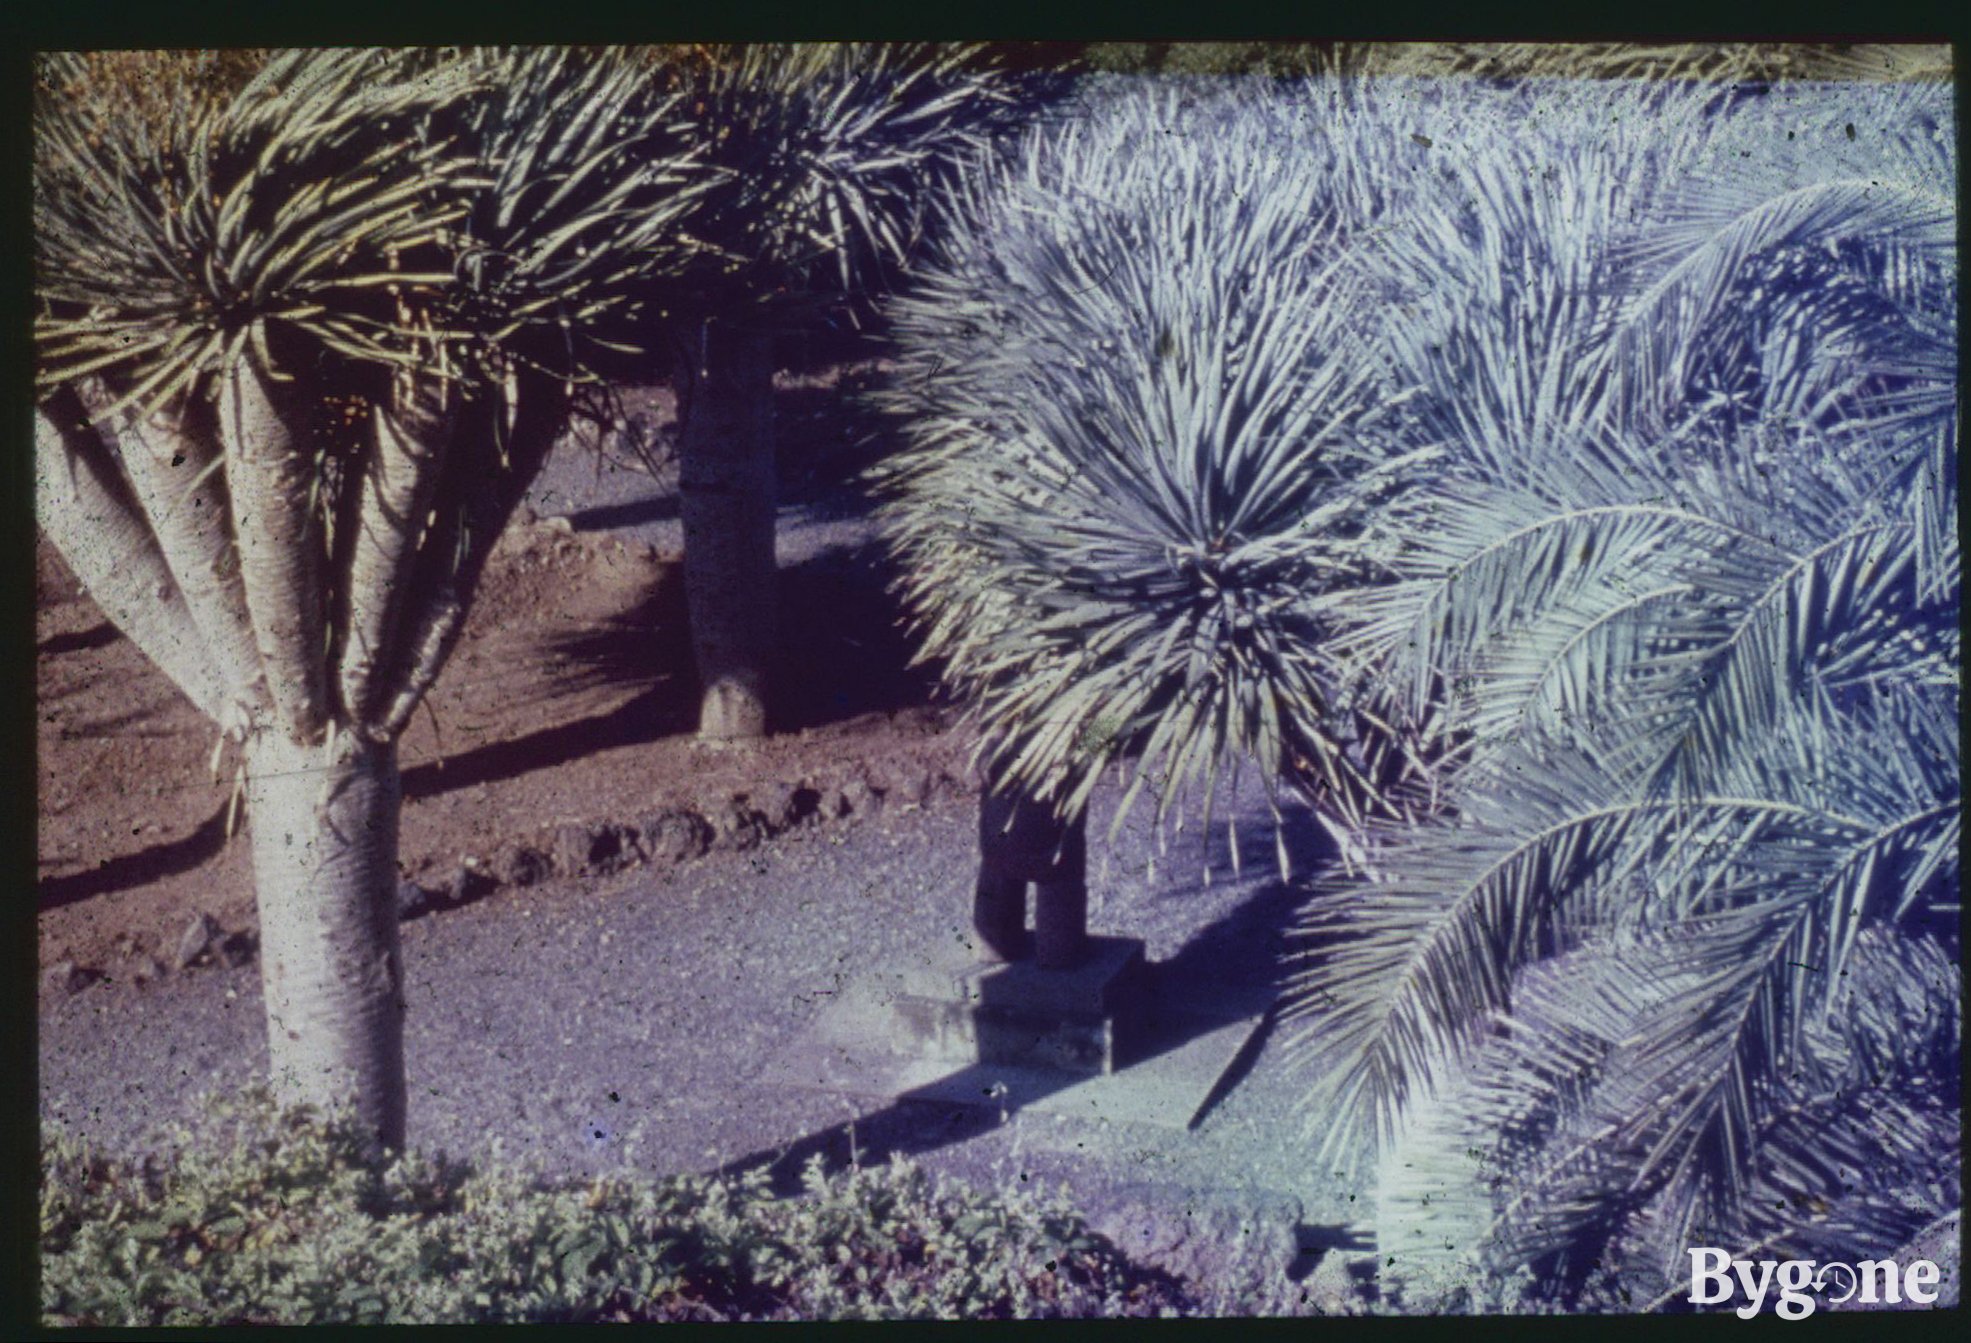 Close up of a small Yucca tree and a bunch of palm leaves fanning out into the right hand side of the frame. The slide has incurred some damage or possible light leak, turning the right side of the image a faint blue.